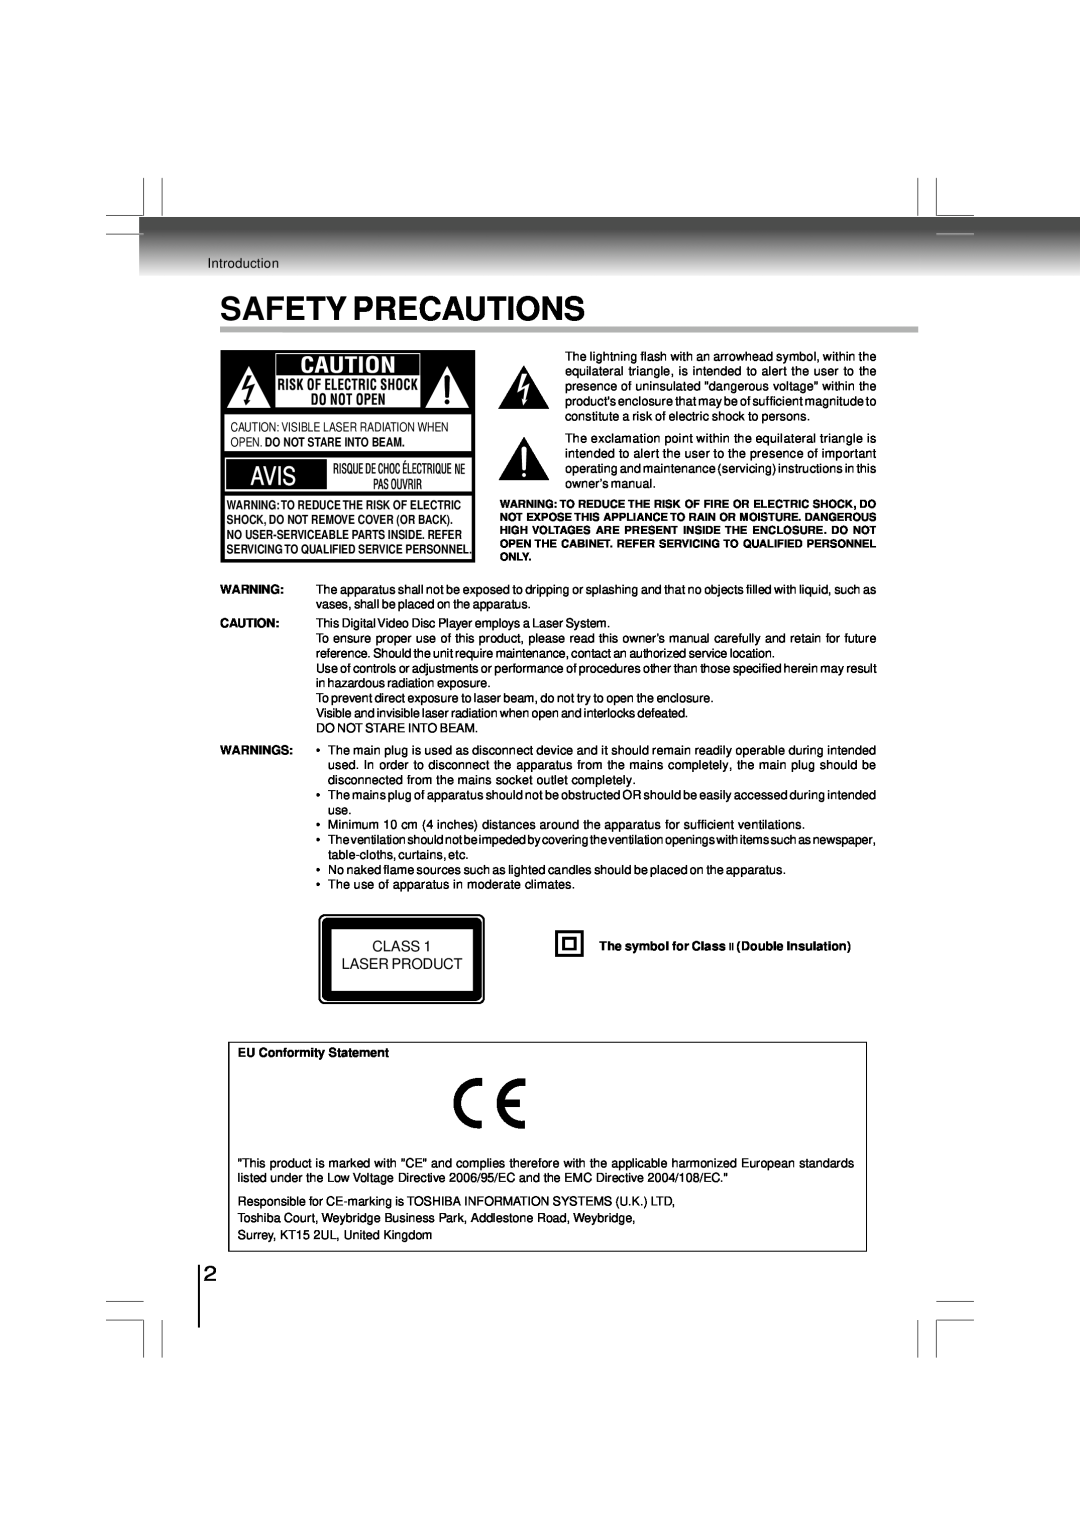 Toshiba SD-480EKE Safety Precautions, Class Laser Product, Avis, Warnings, The symbol for Class Double lnsulation 